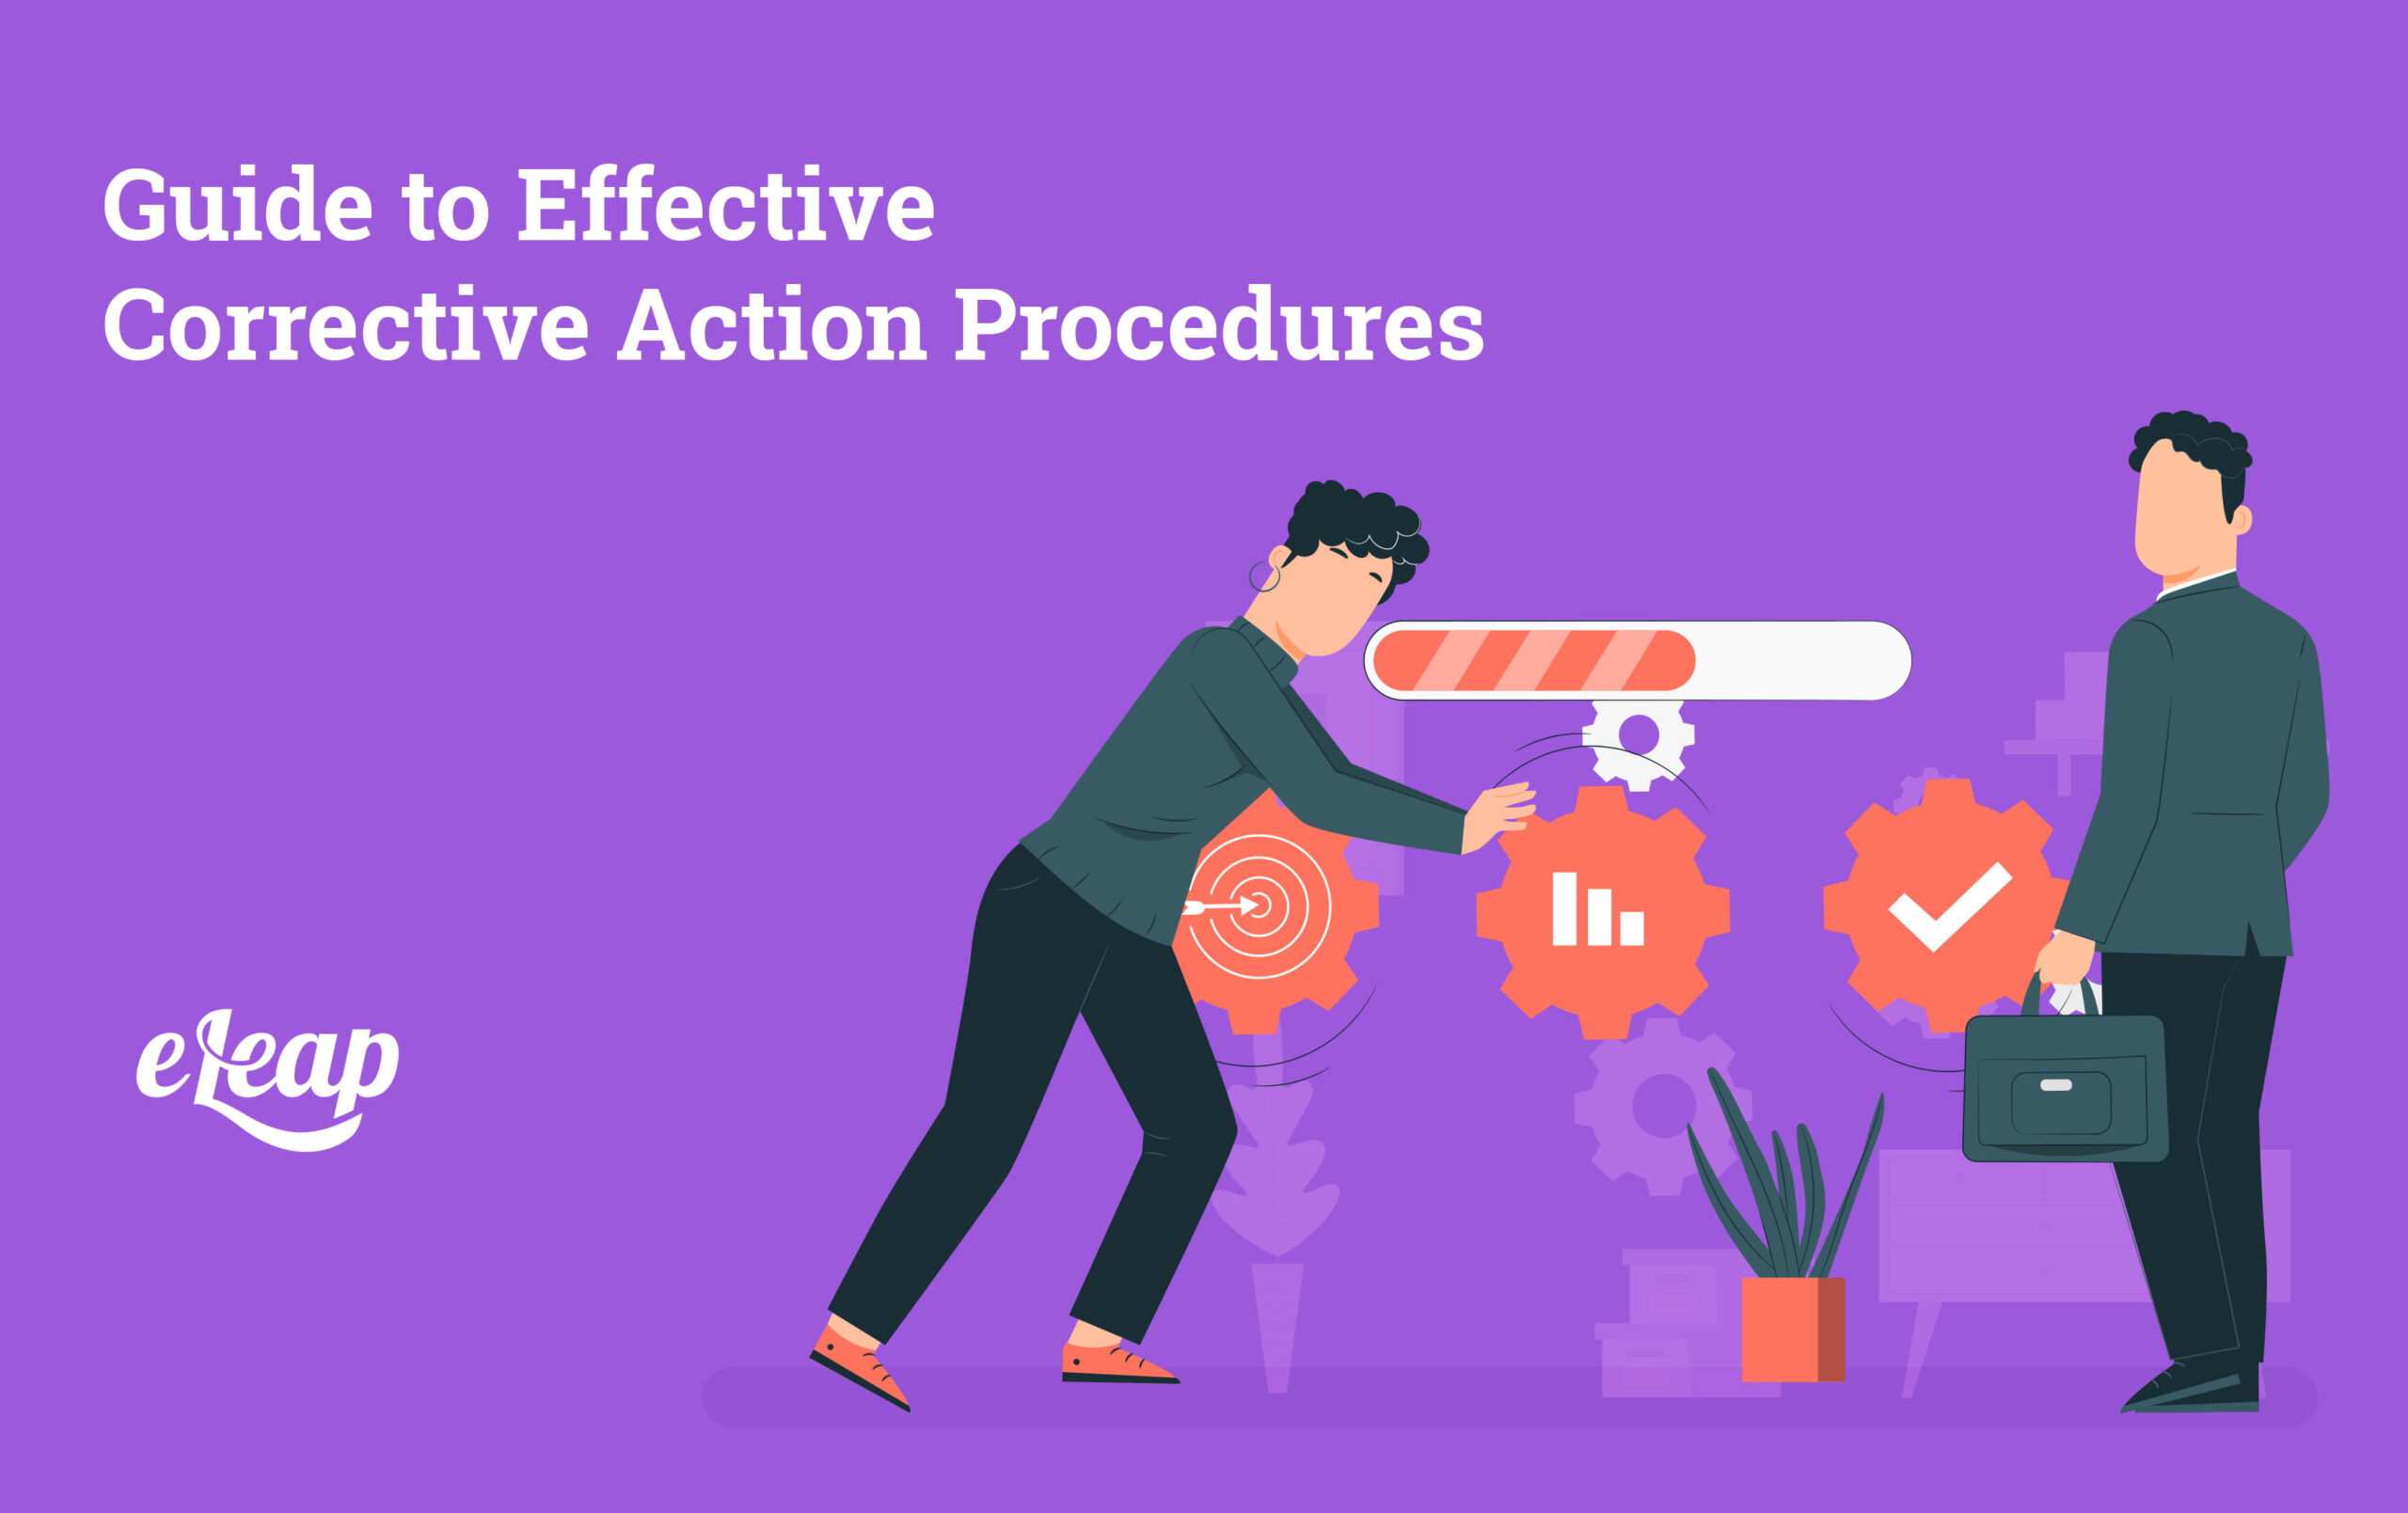 Guide to Effective Corrective Action Procedures